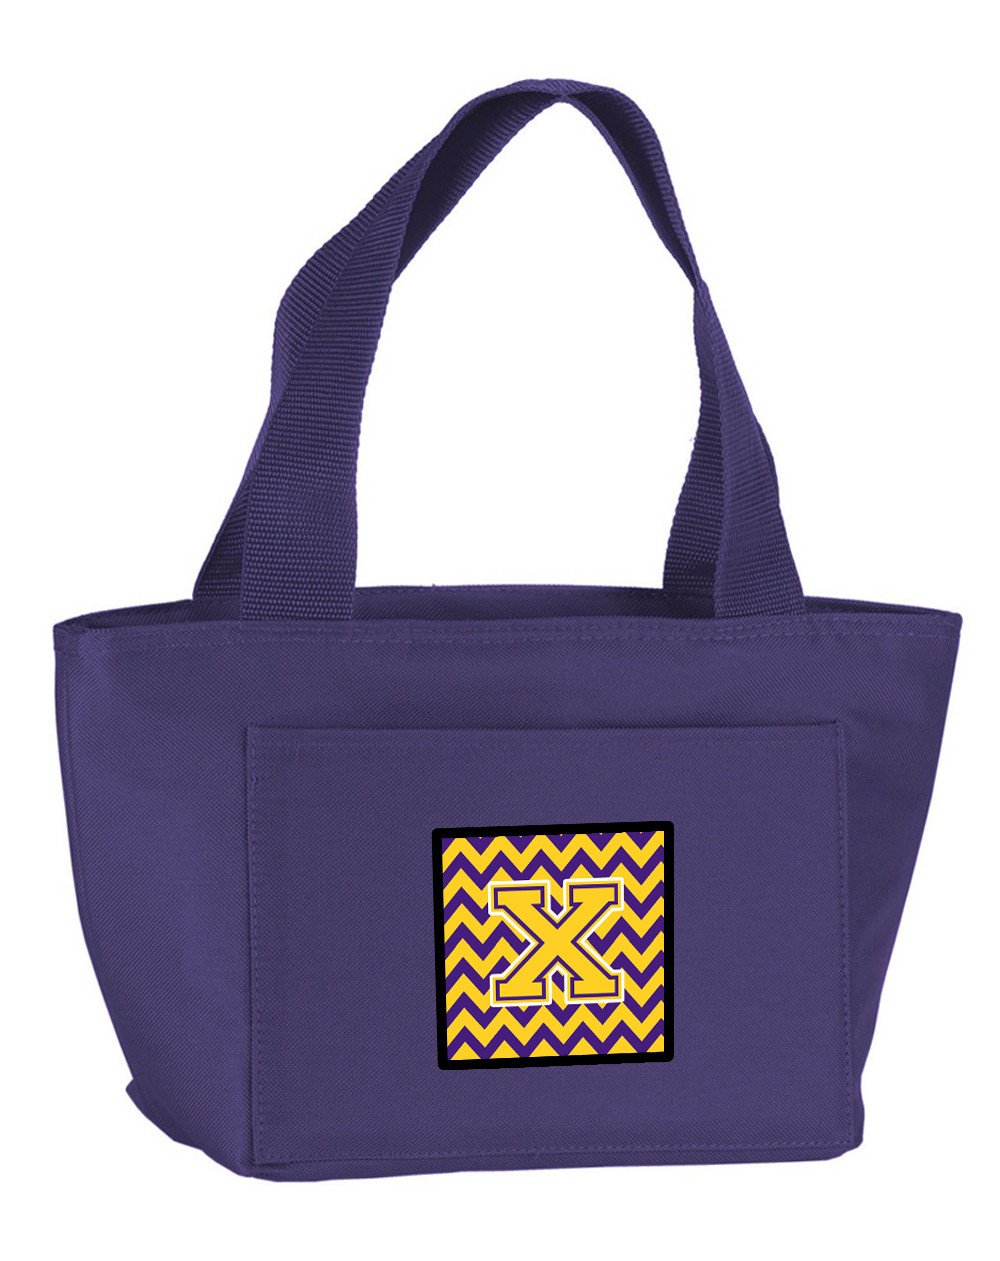 Letter X Chevron Purple and Gold Lunch Bag CJ1041-XPR-8808 by Caroline's Treasures